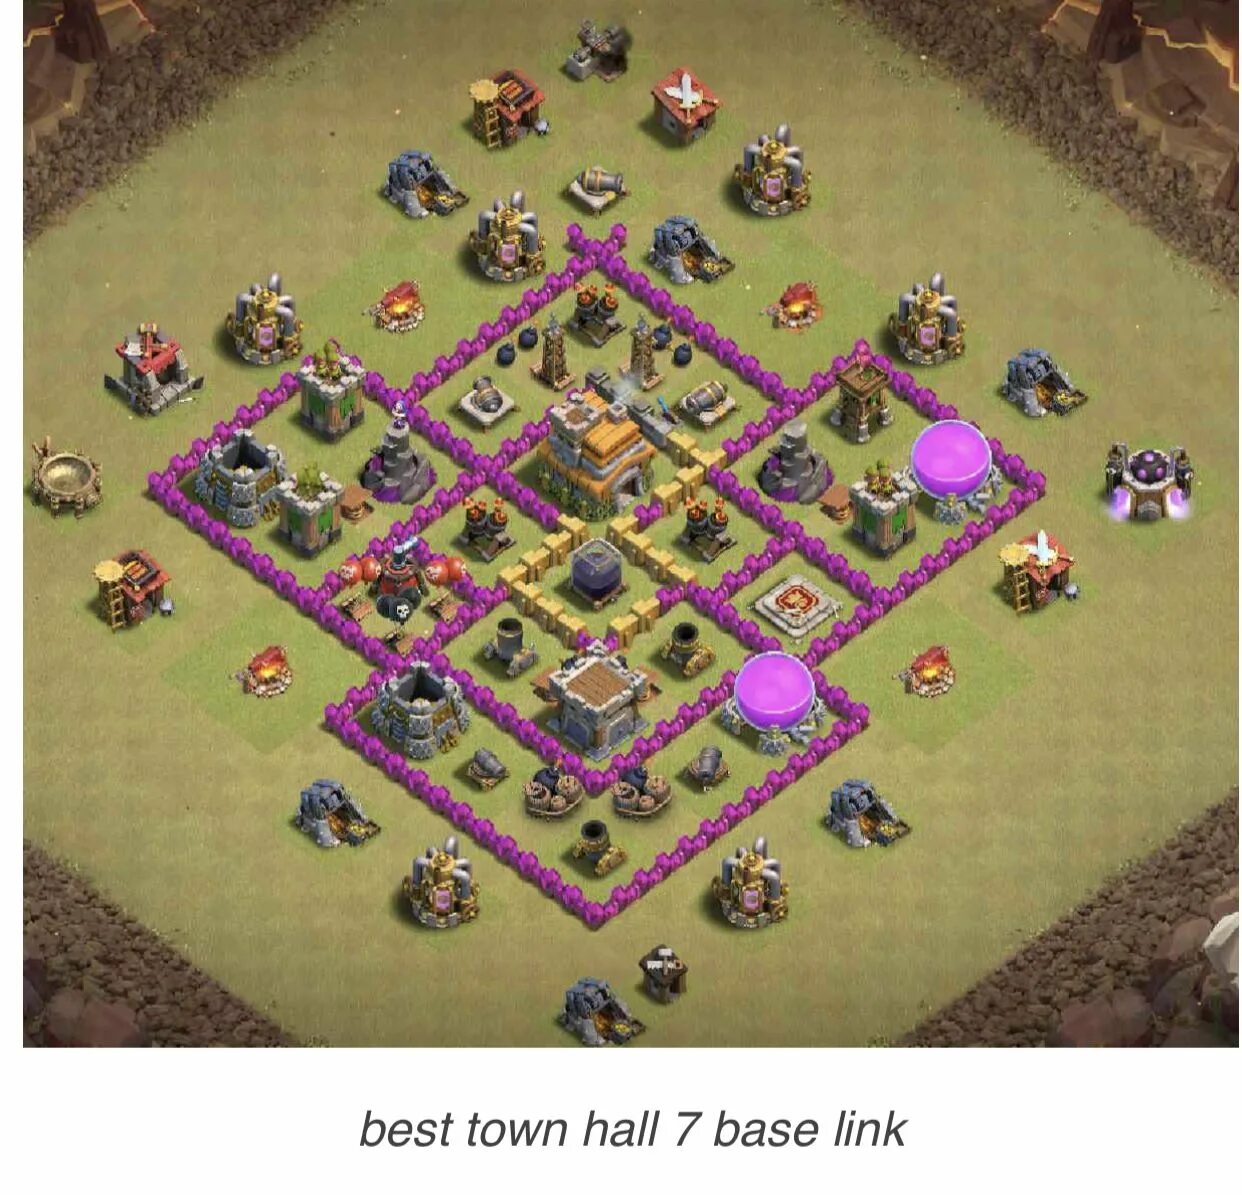 Th7 Base link. Town Hall 7 Base. Clash of Clans Town Hall 7. Bases 7th Clash of Clans. Clash bases